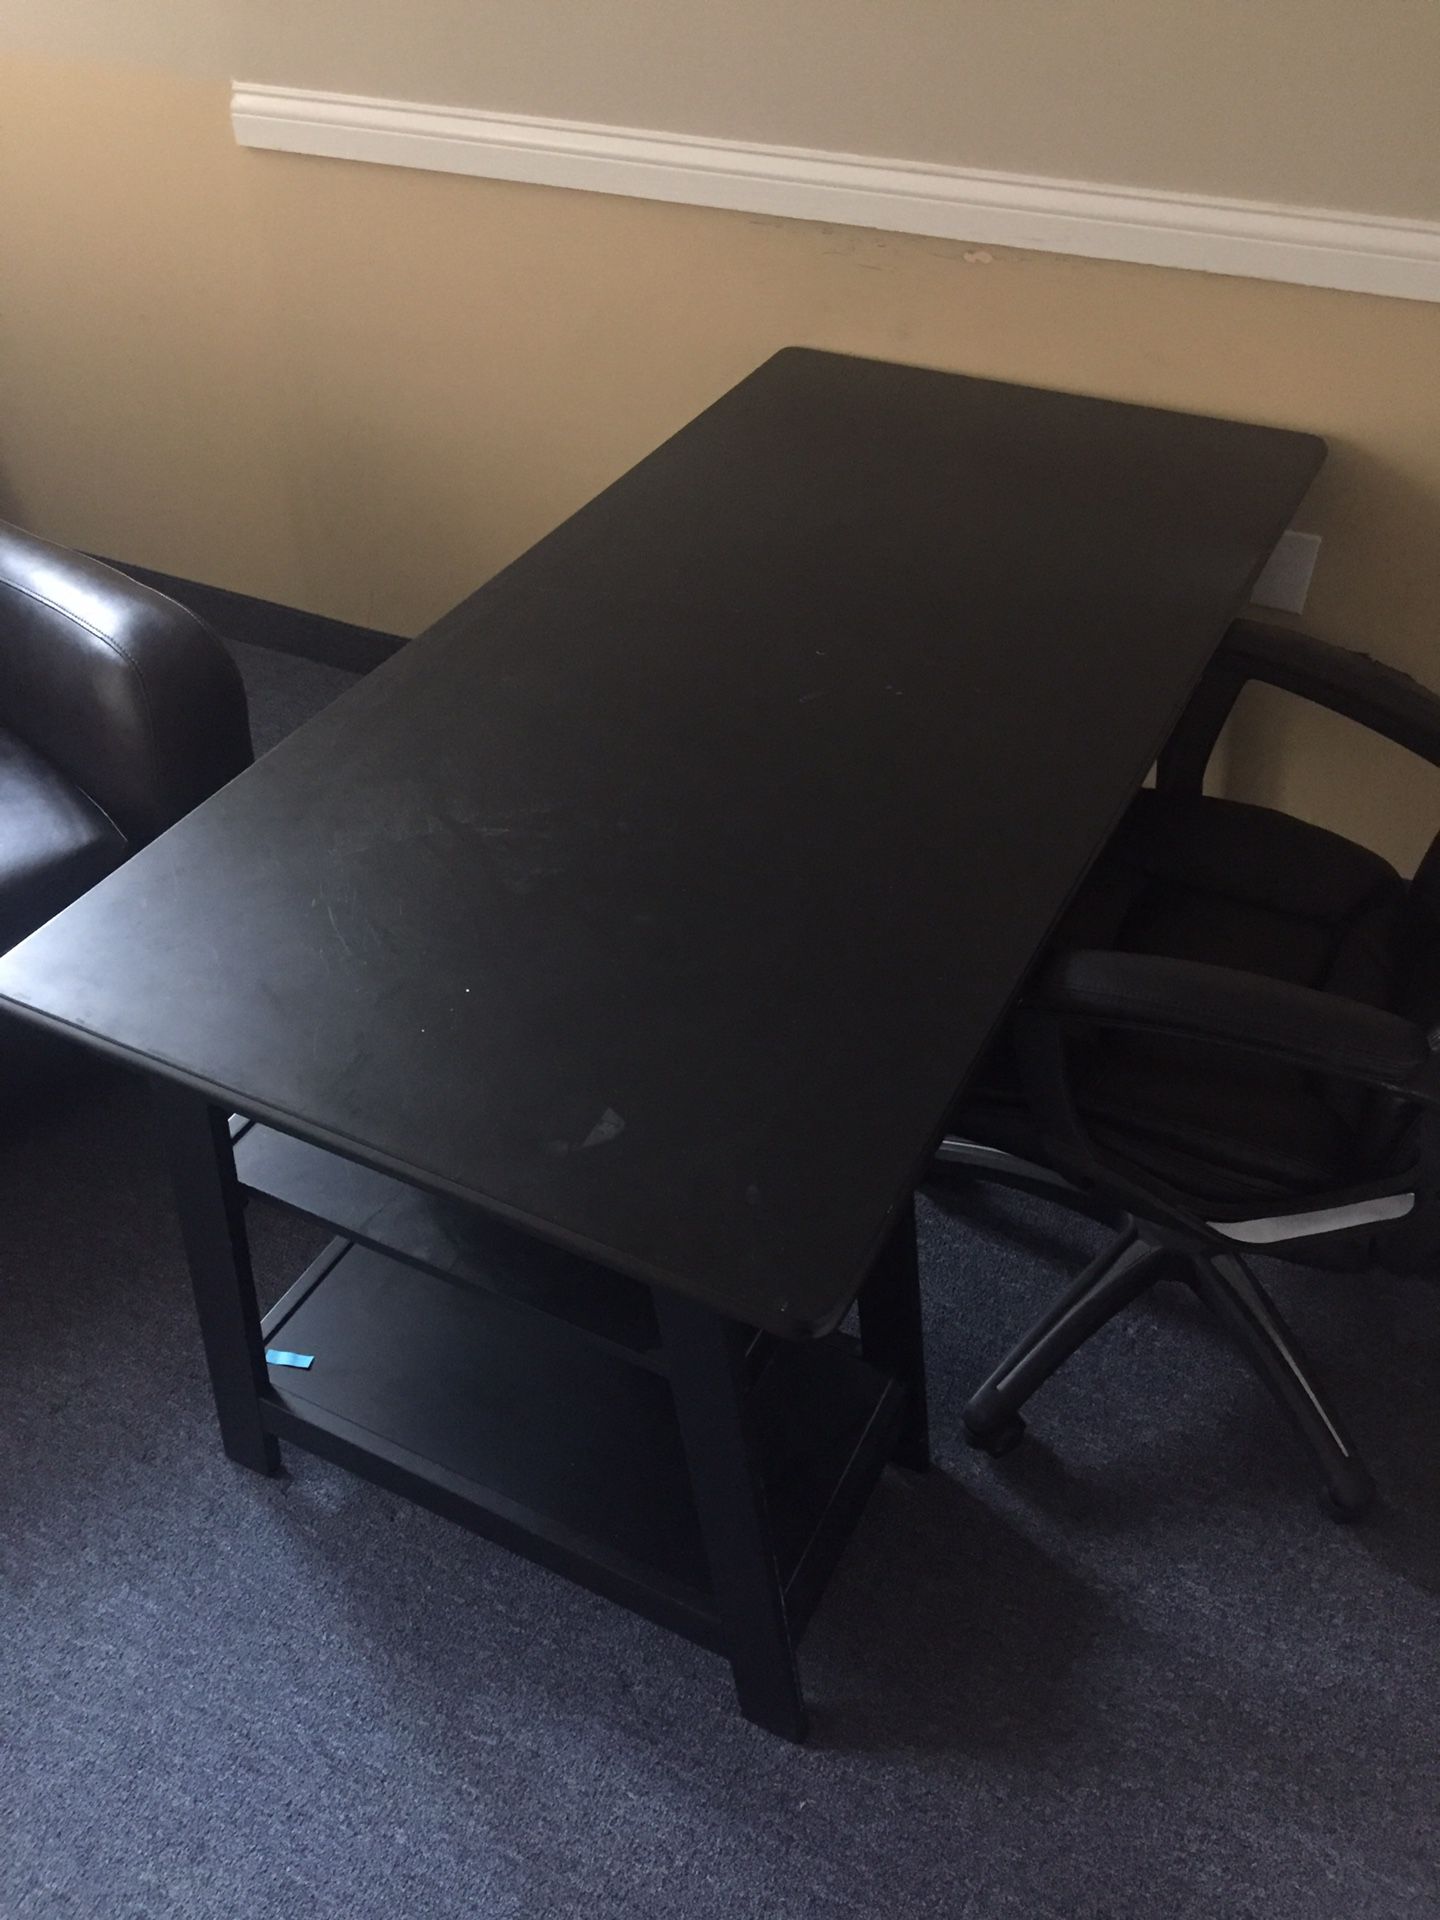 Office furniture sale everything must go by Monday! First come first serve hot items!!!